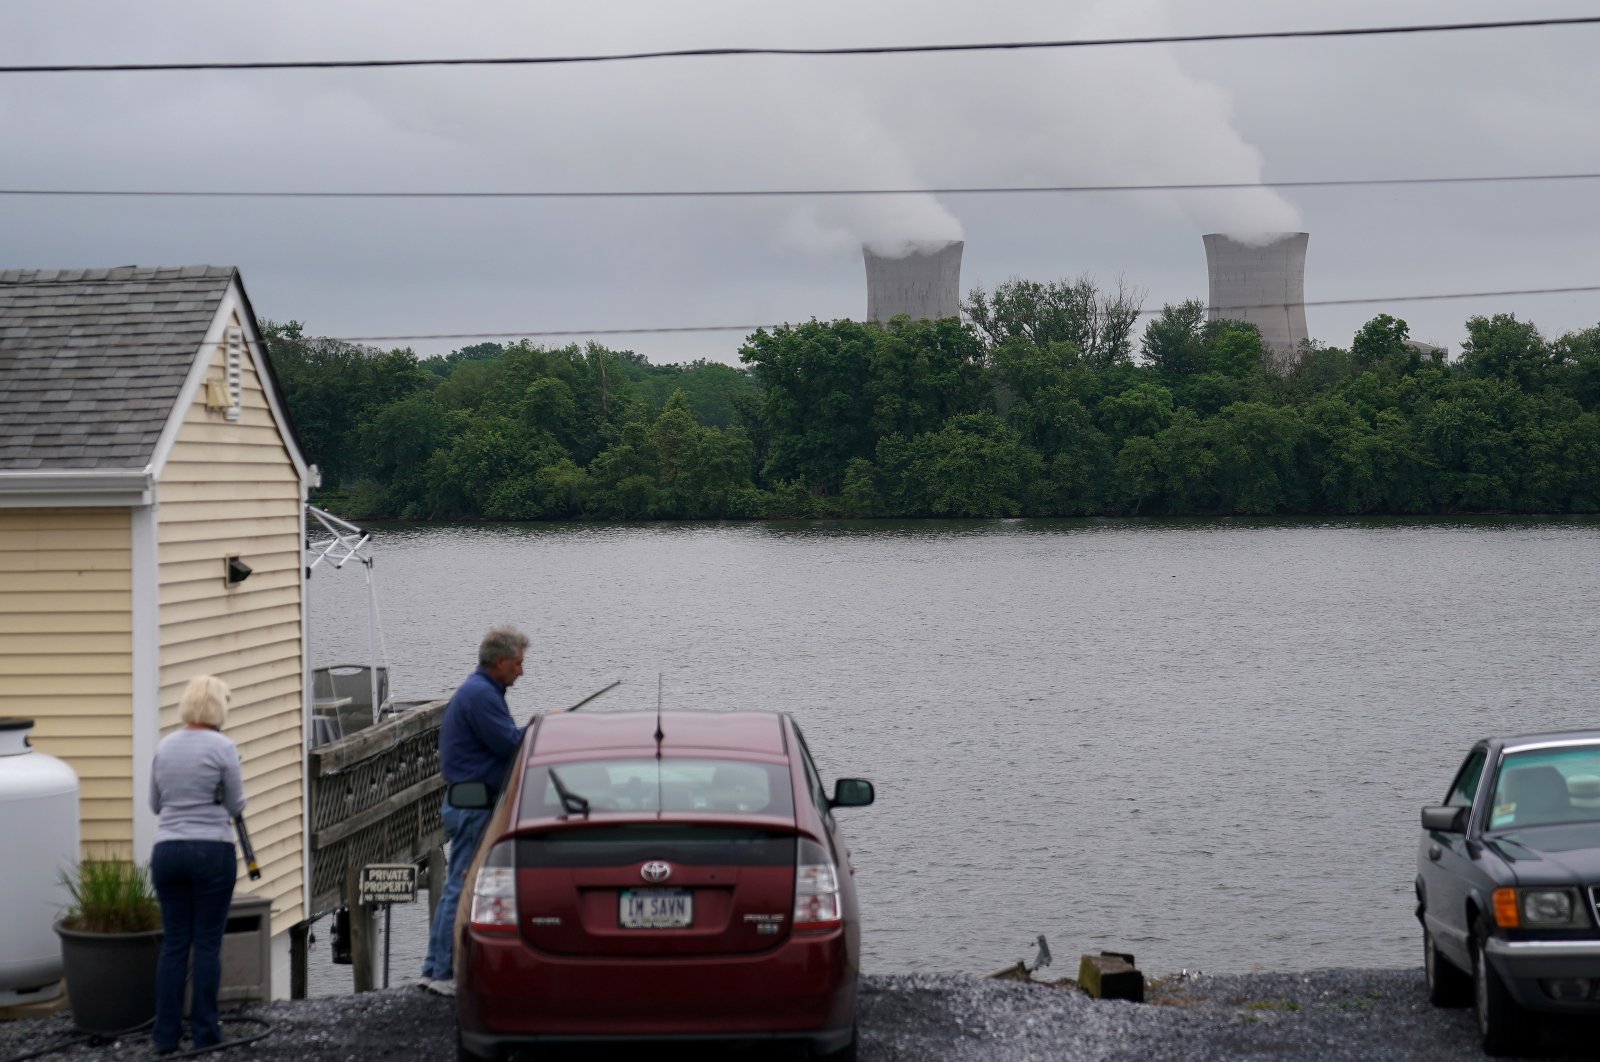 People work on a car across the Susquehanna River in front of the Three Mile Island Nuclear Power Plant in Goldsboro, Pennsylvania, U.S. May 30, 2017. (Reuters Photo)